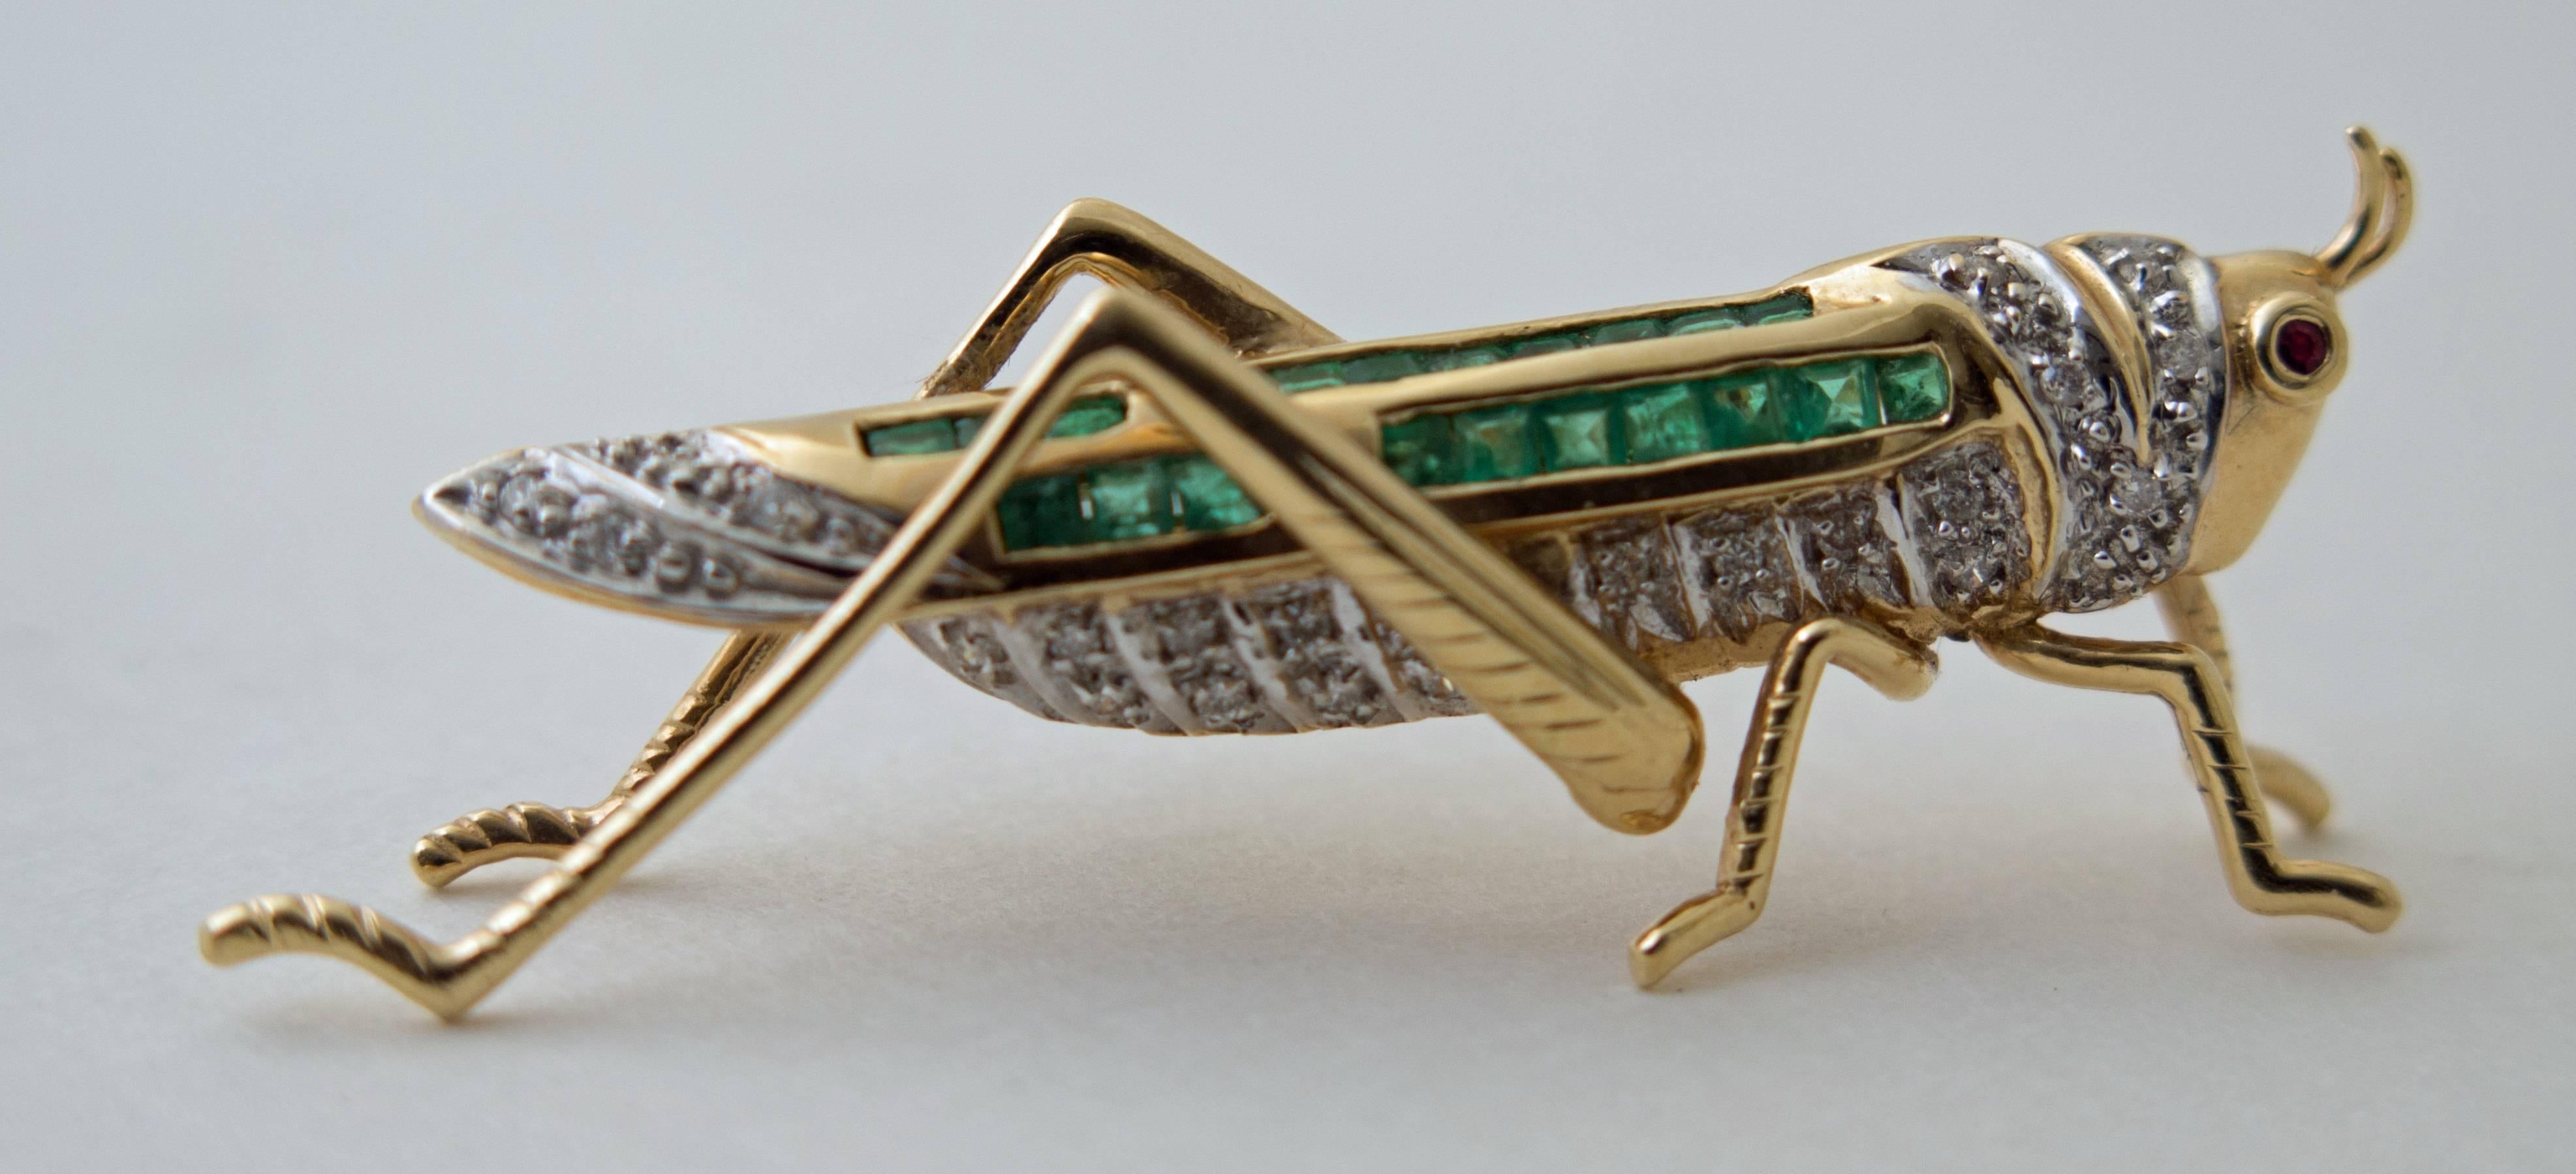 A beautiful pin in a shape of a grasshopper handcrafted in 14K yellow gold with 21 emeralds weighting approximate 0.9 carats, 22 round cut diamonds weighting 2.2 carats and ruby eye.
measured 50 mm x 22 mm. weight 7.8 grams.